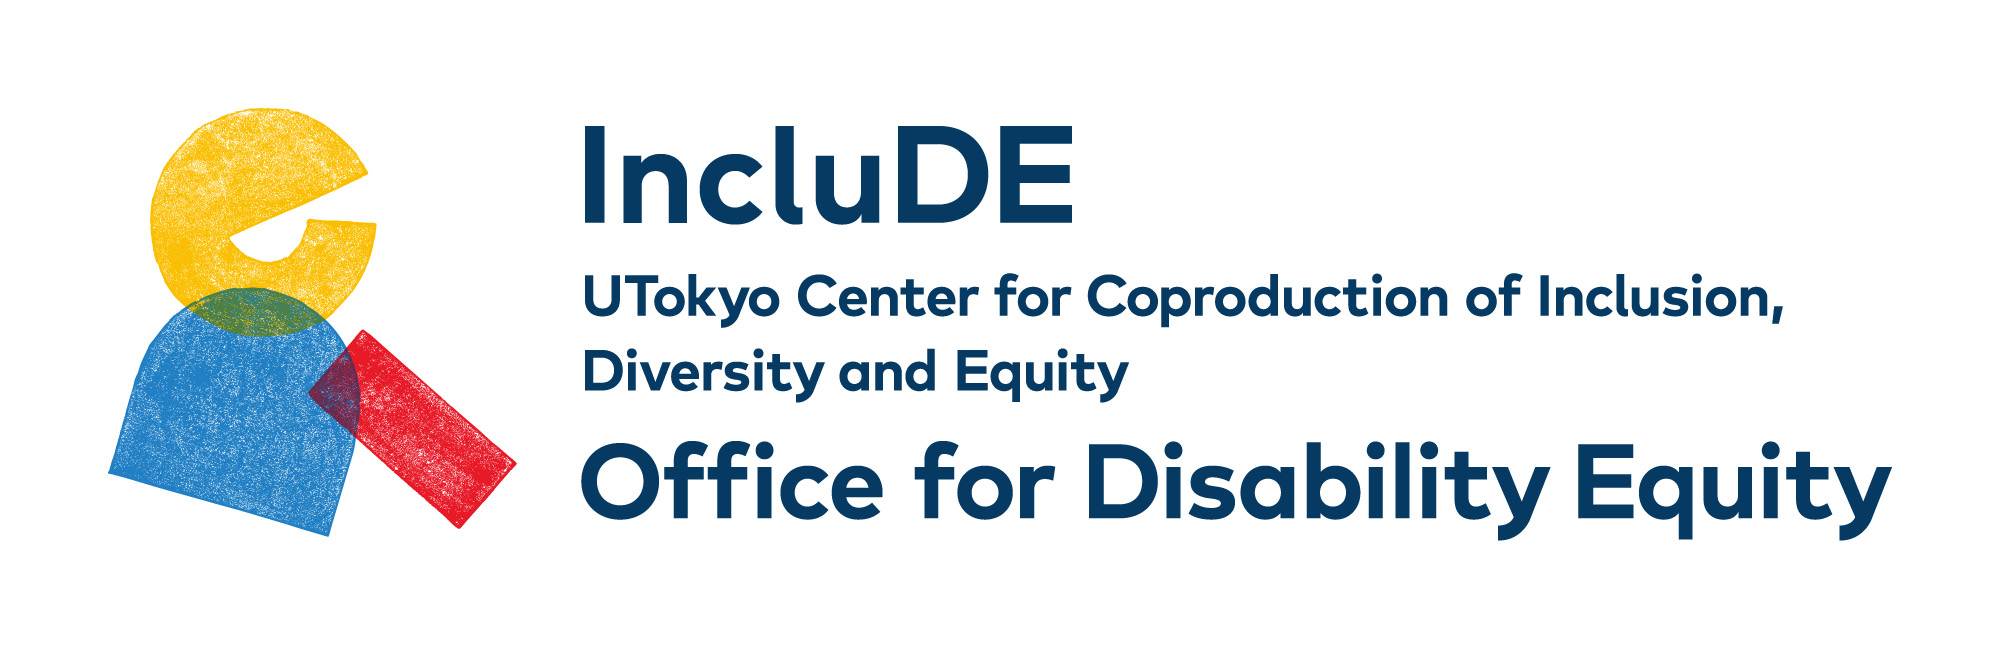 Office for Disability Equity（link）